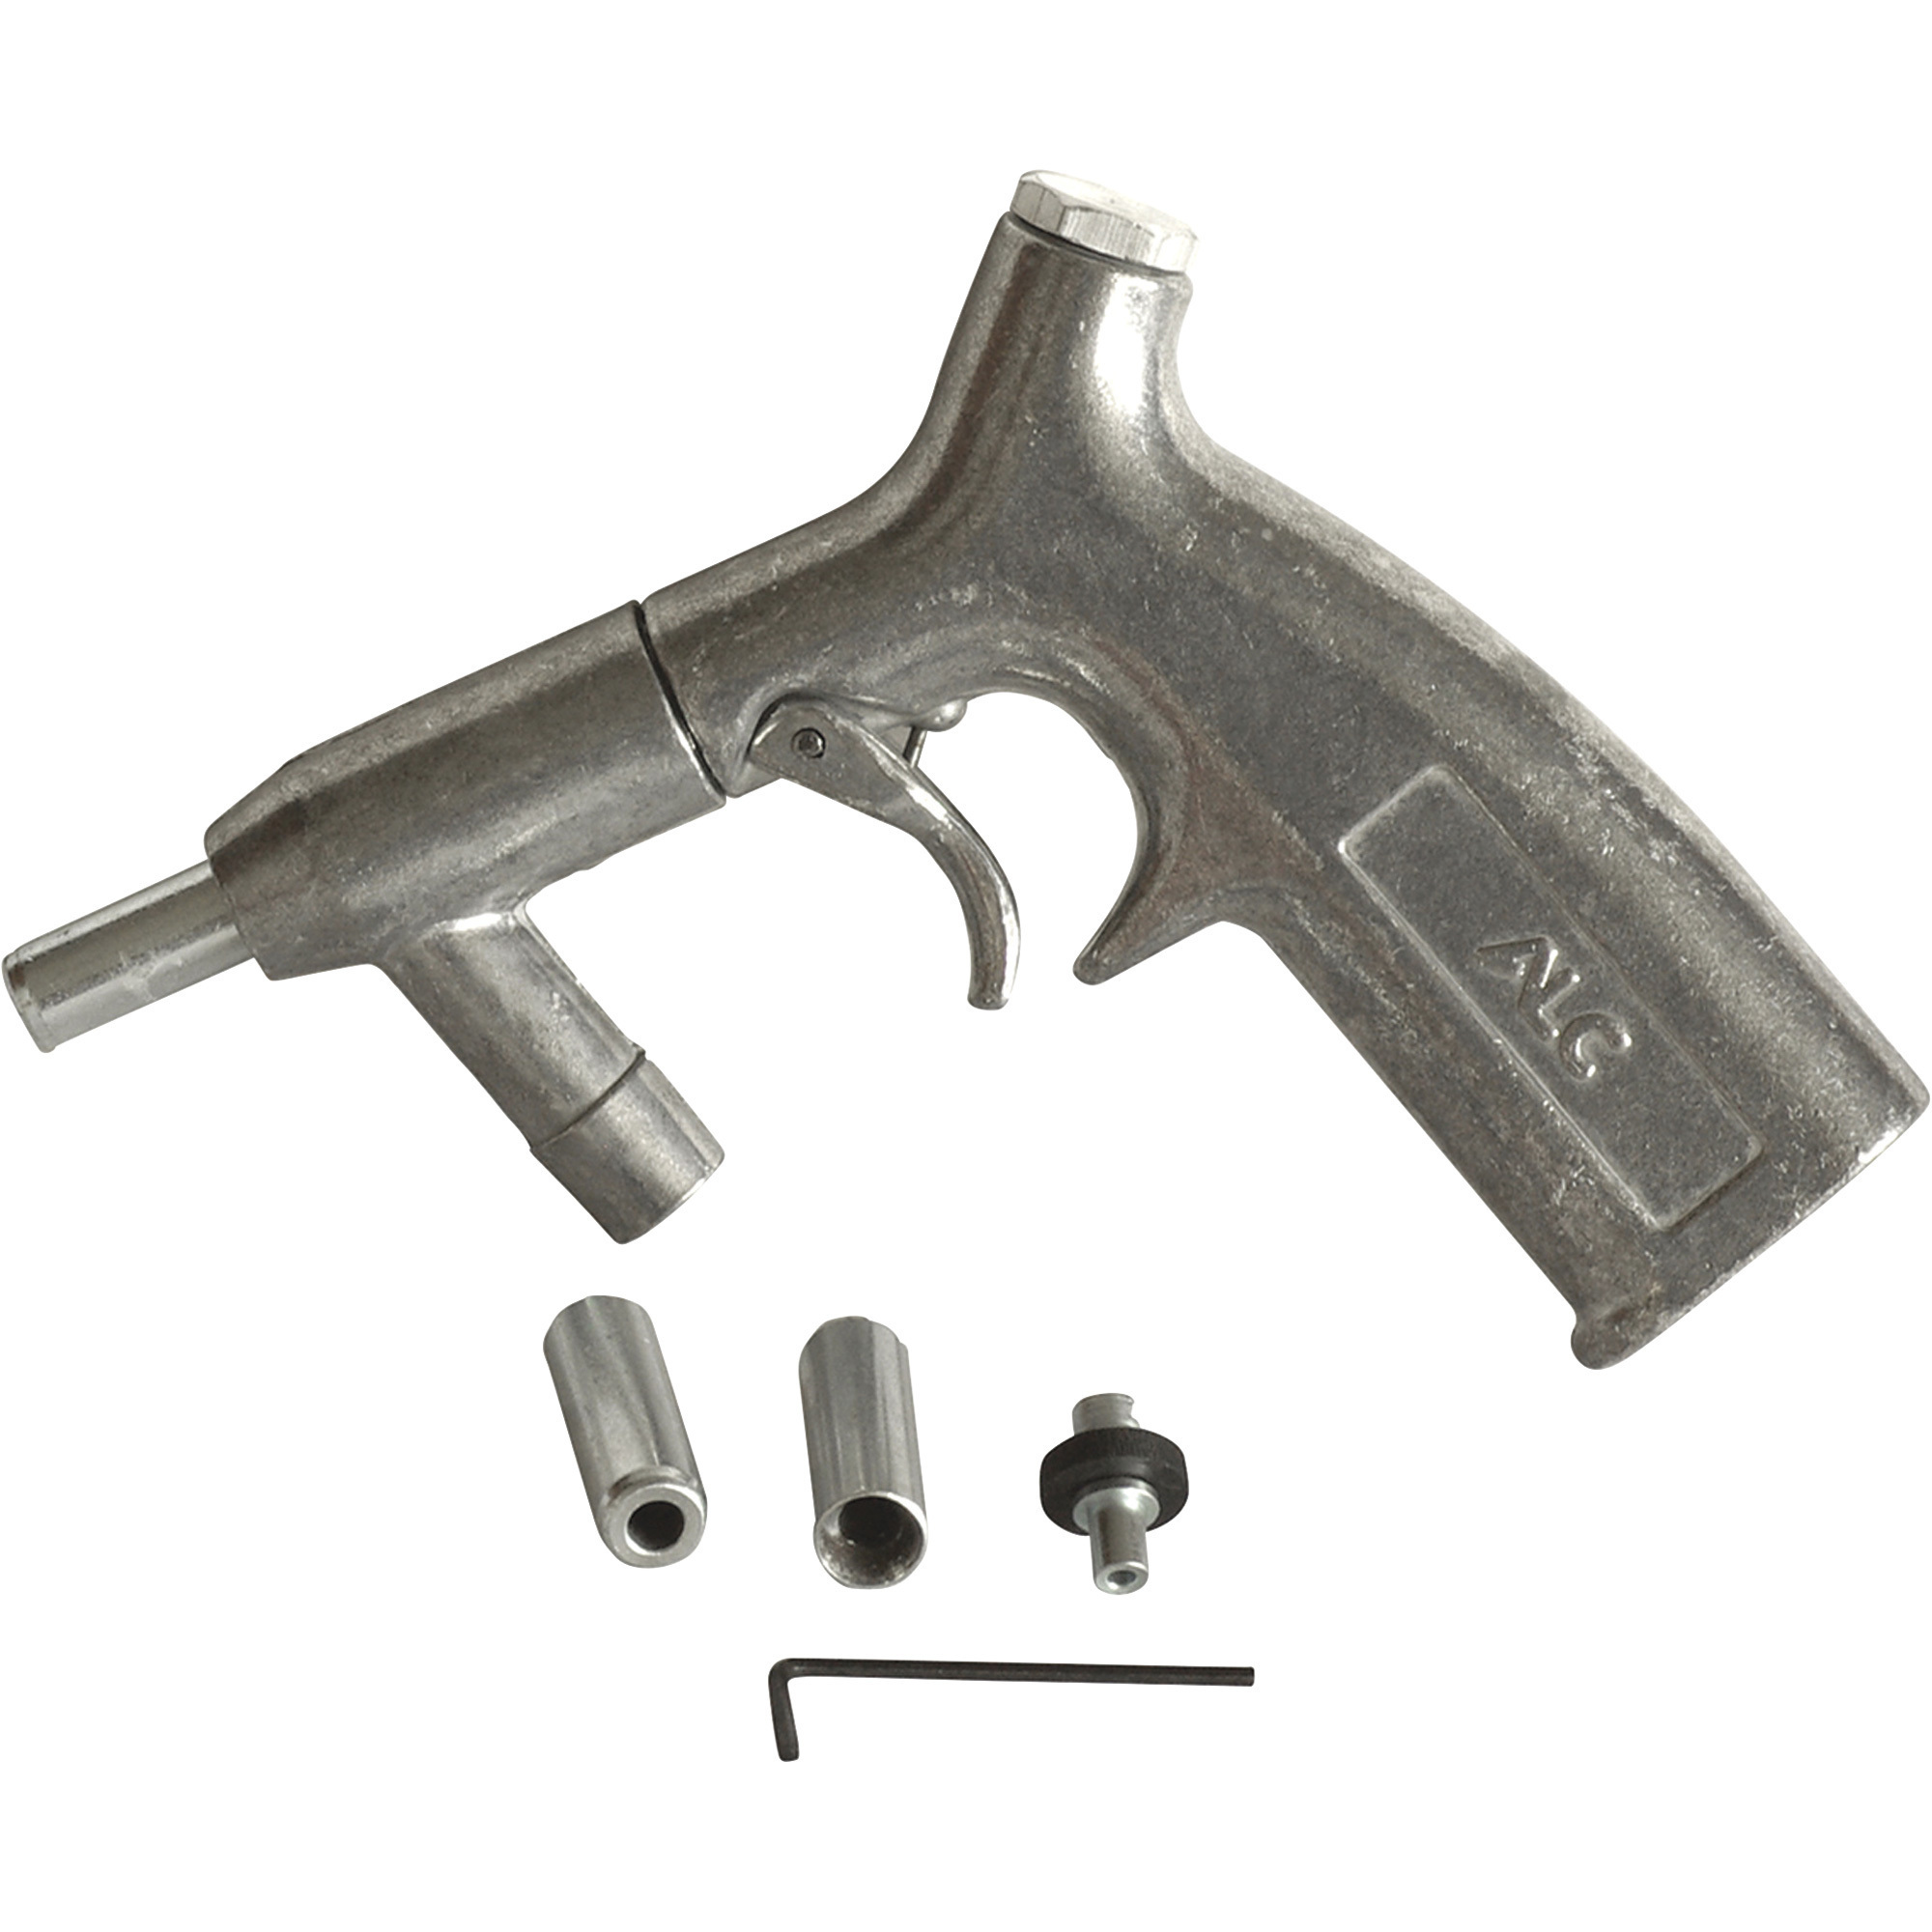 ALC Gun and Nozzle for Siphon Blasters â Model 40153